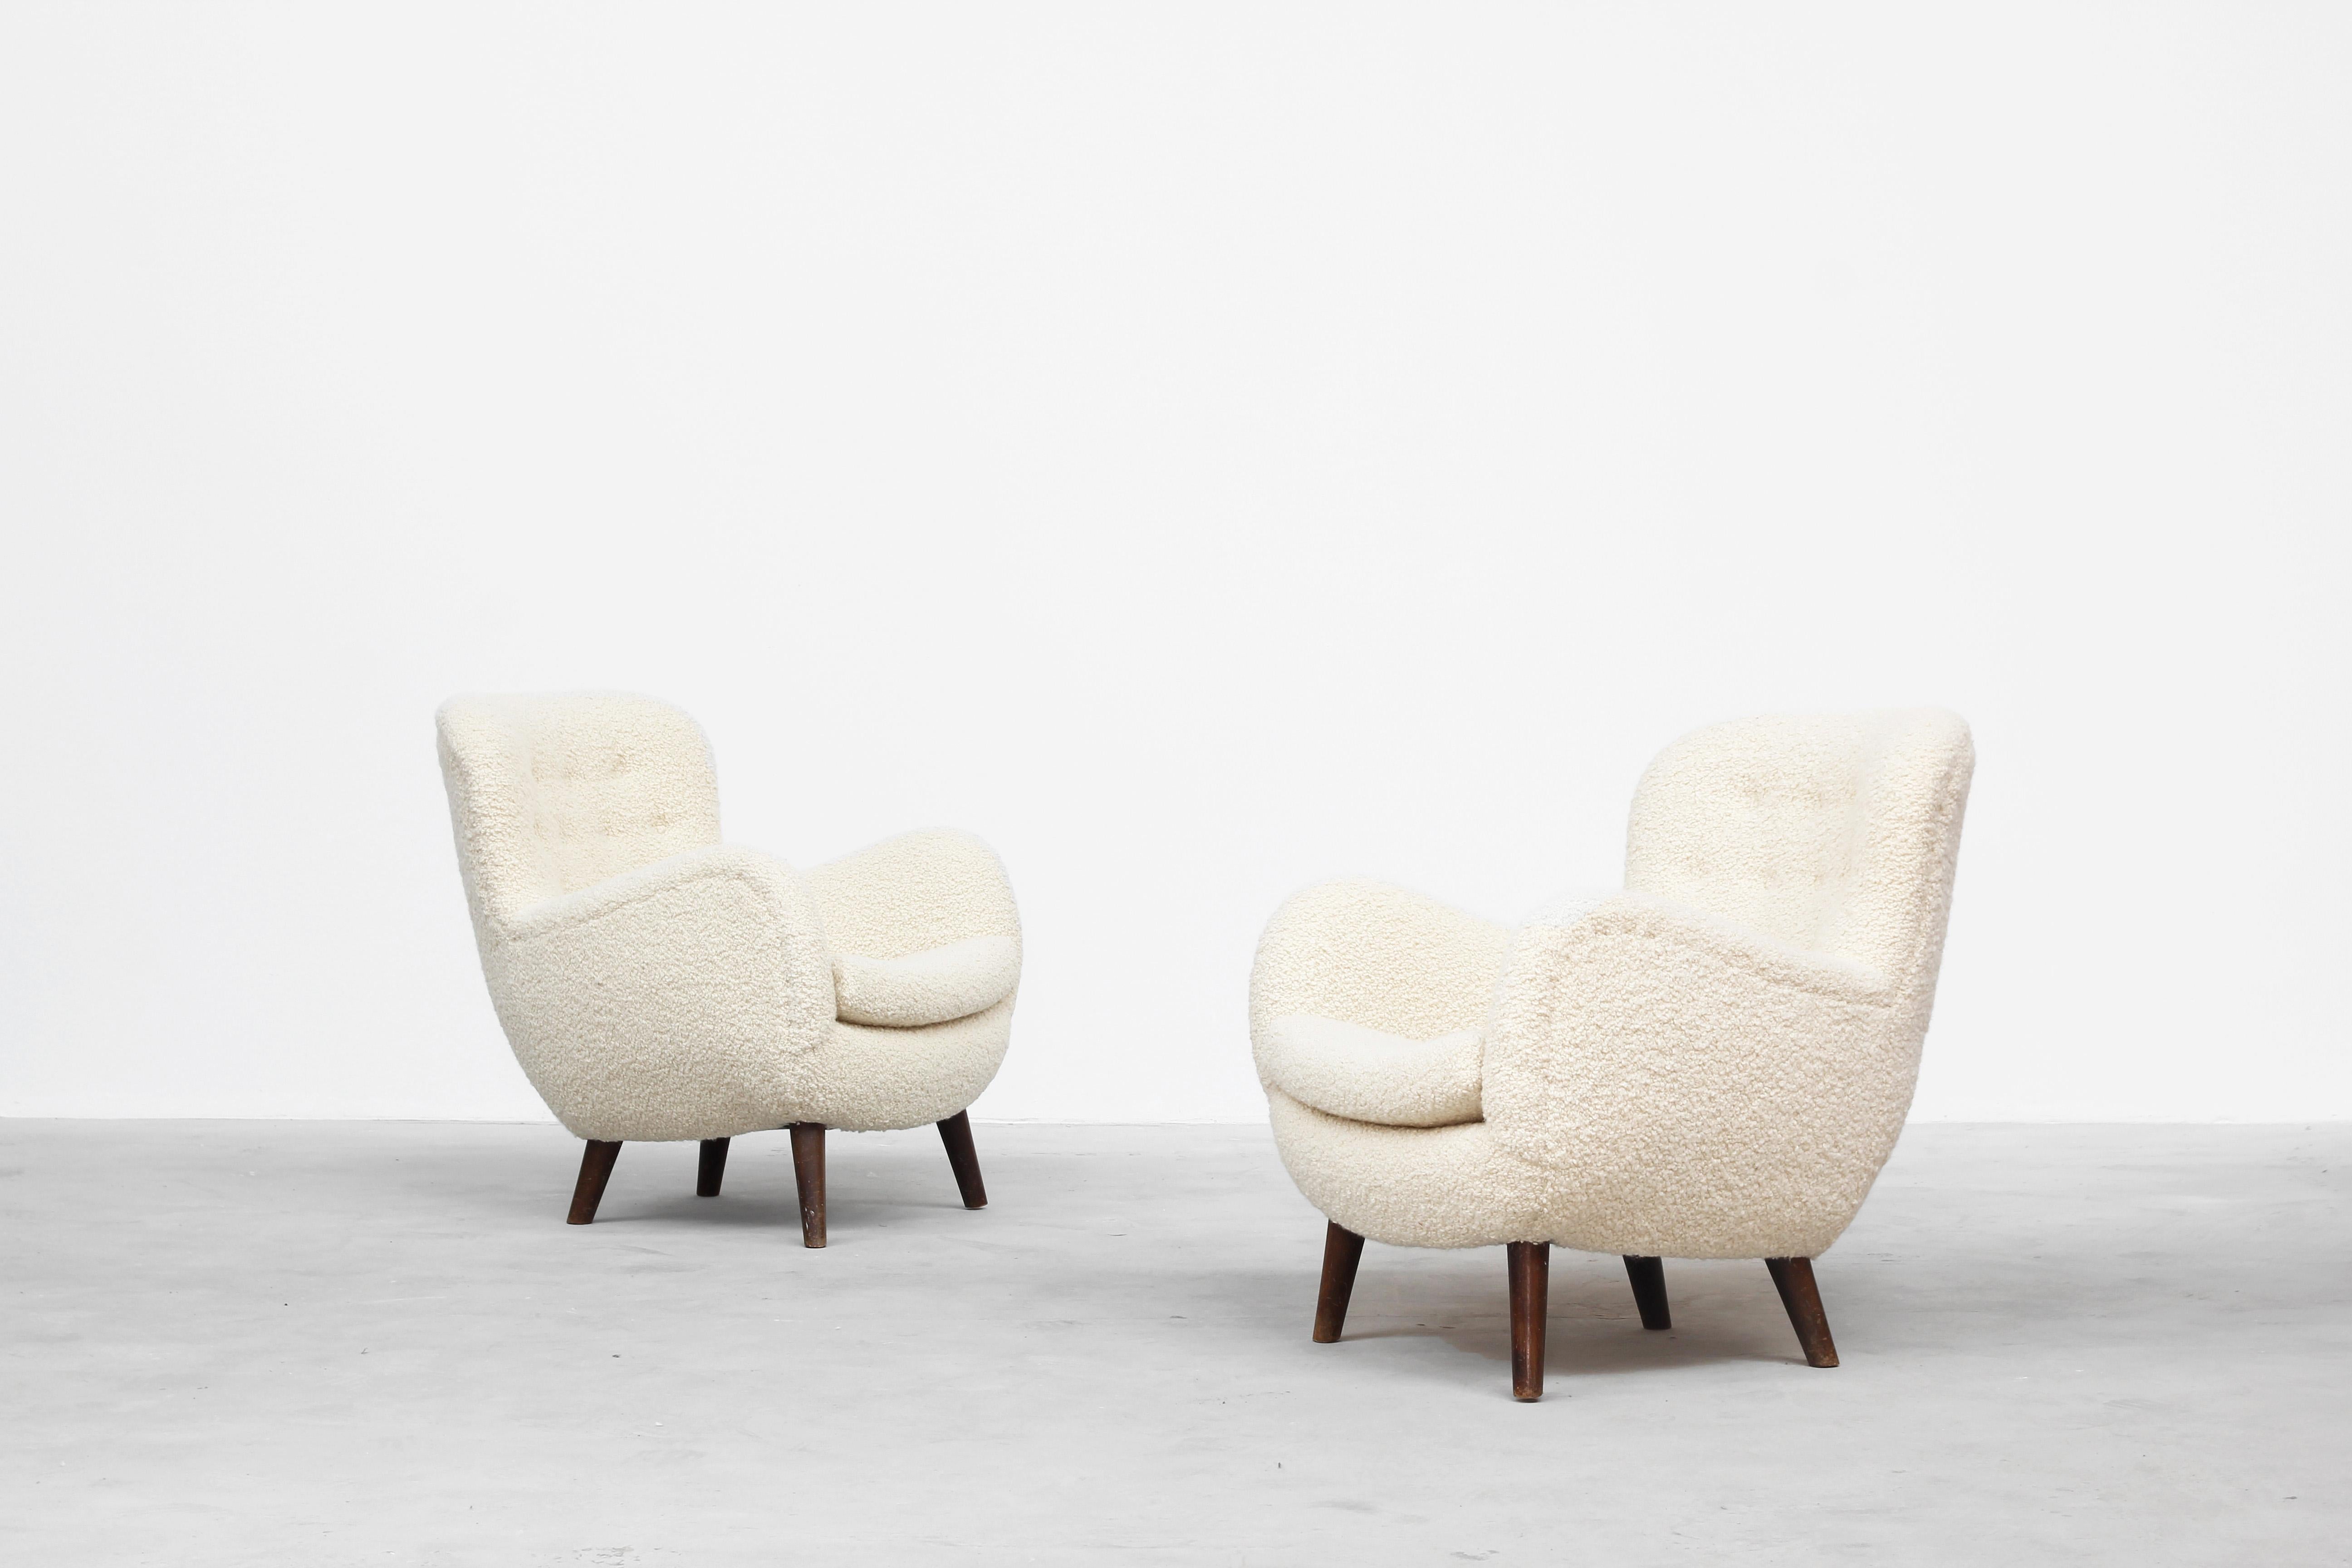 20th Century Beautiful Pair of Danish Lounge Chairs, Frits Schlegel Attributed, Denmark, 1940